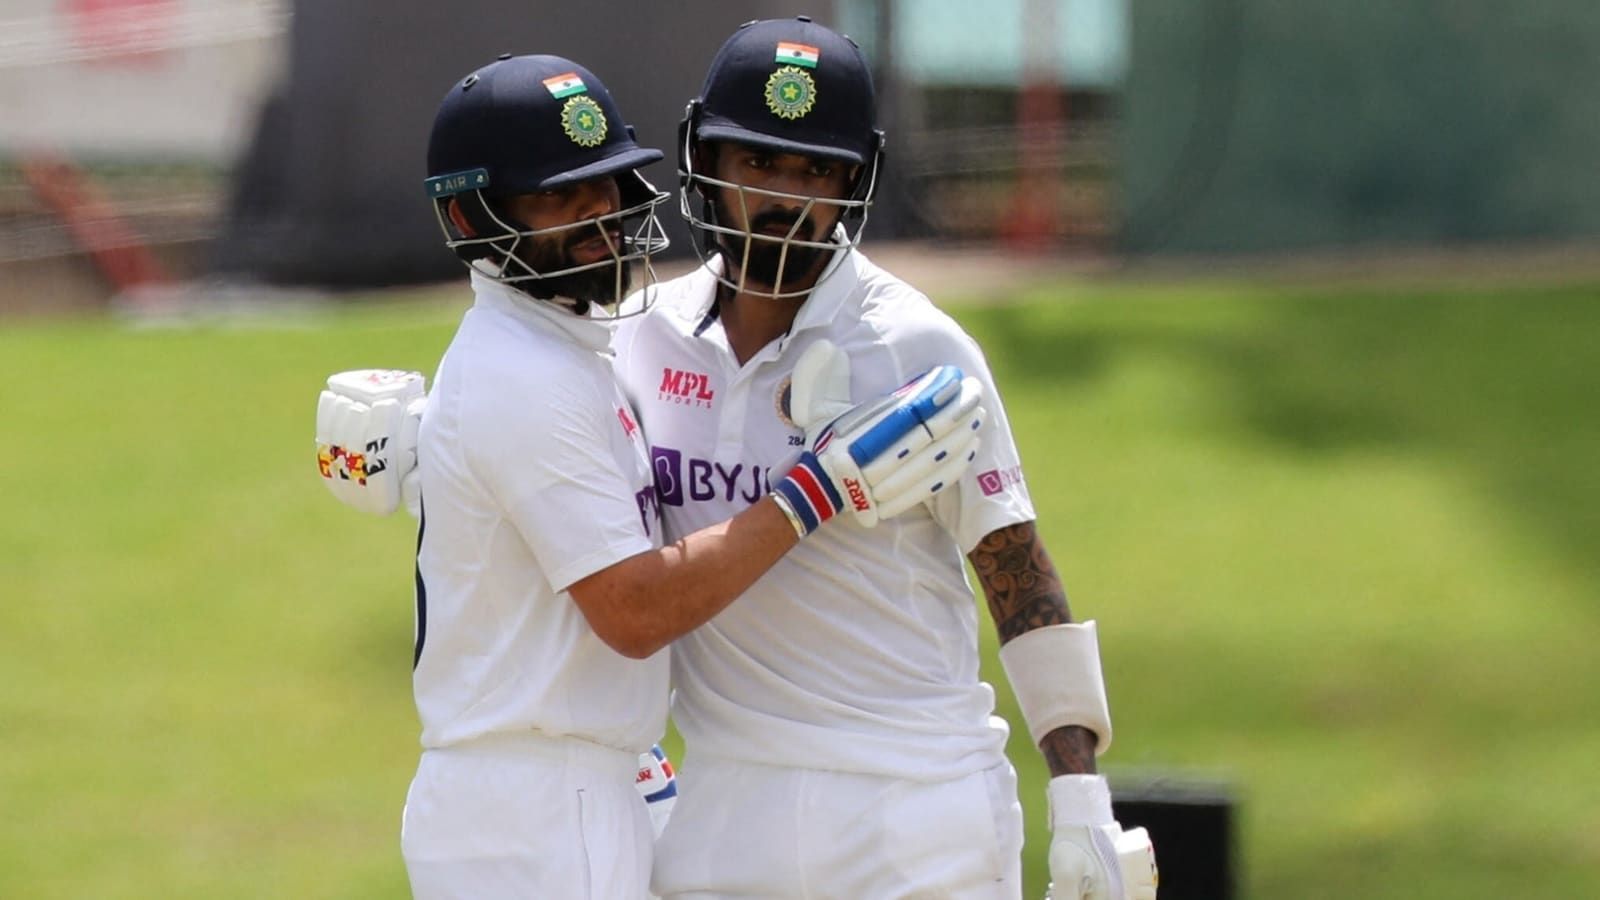 KL Rahul grew as a Test cricketer under the former captain.